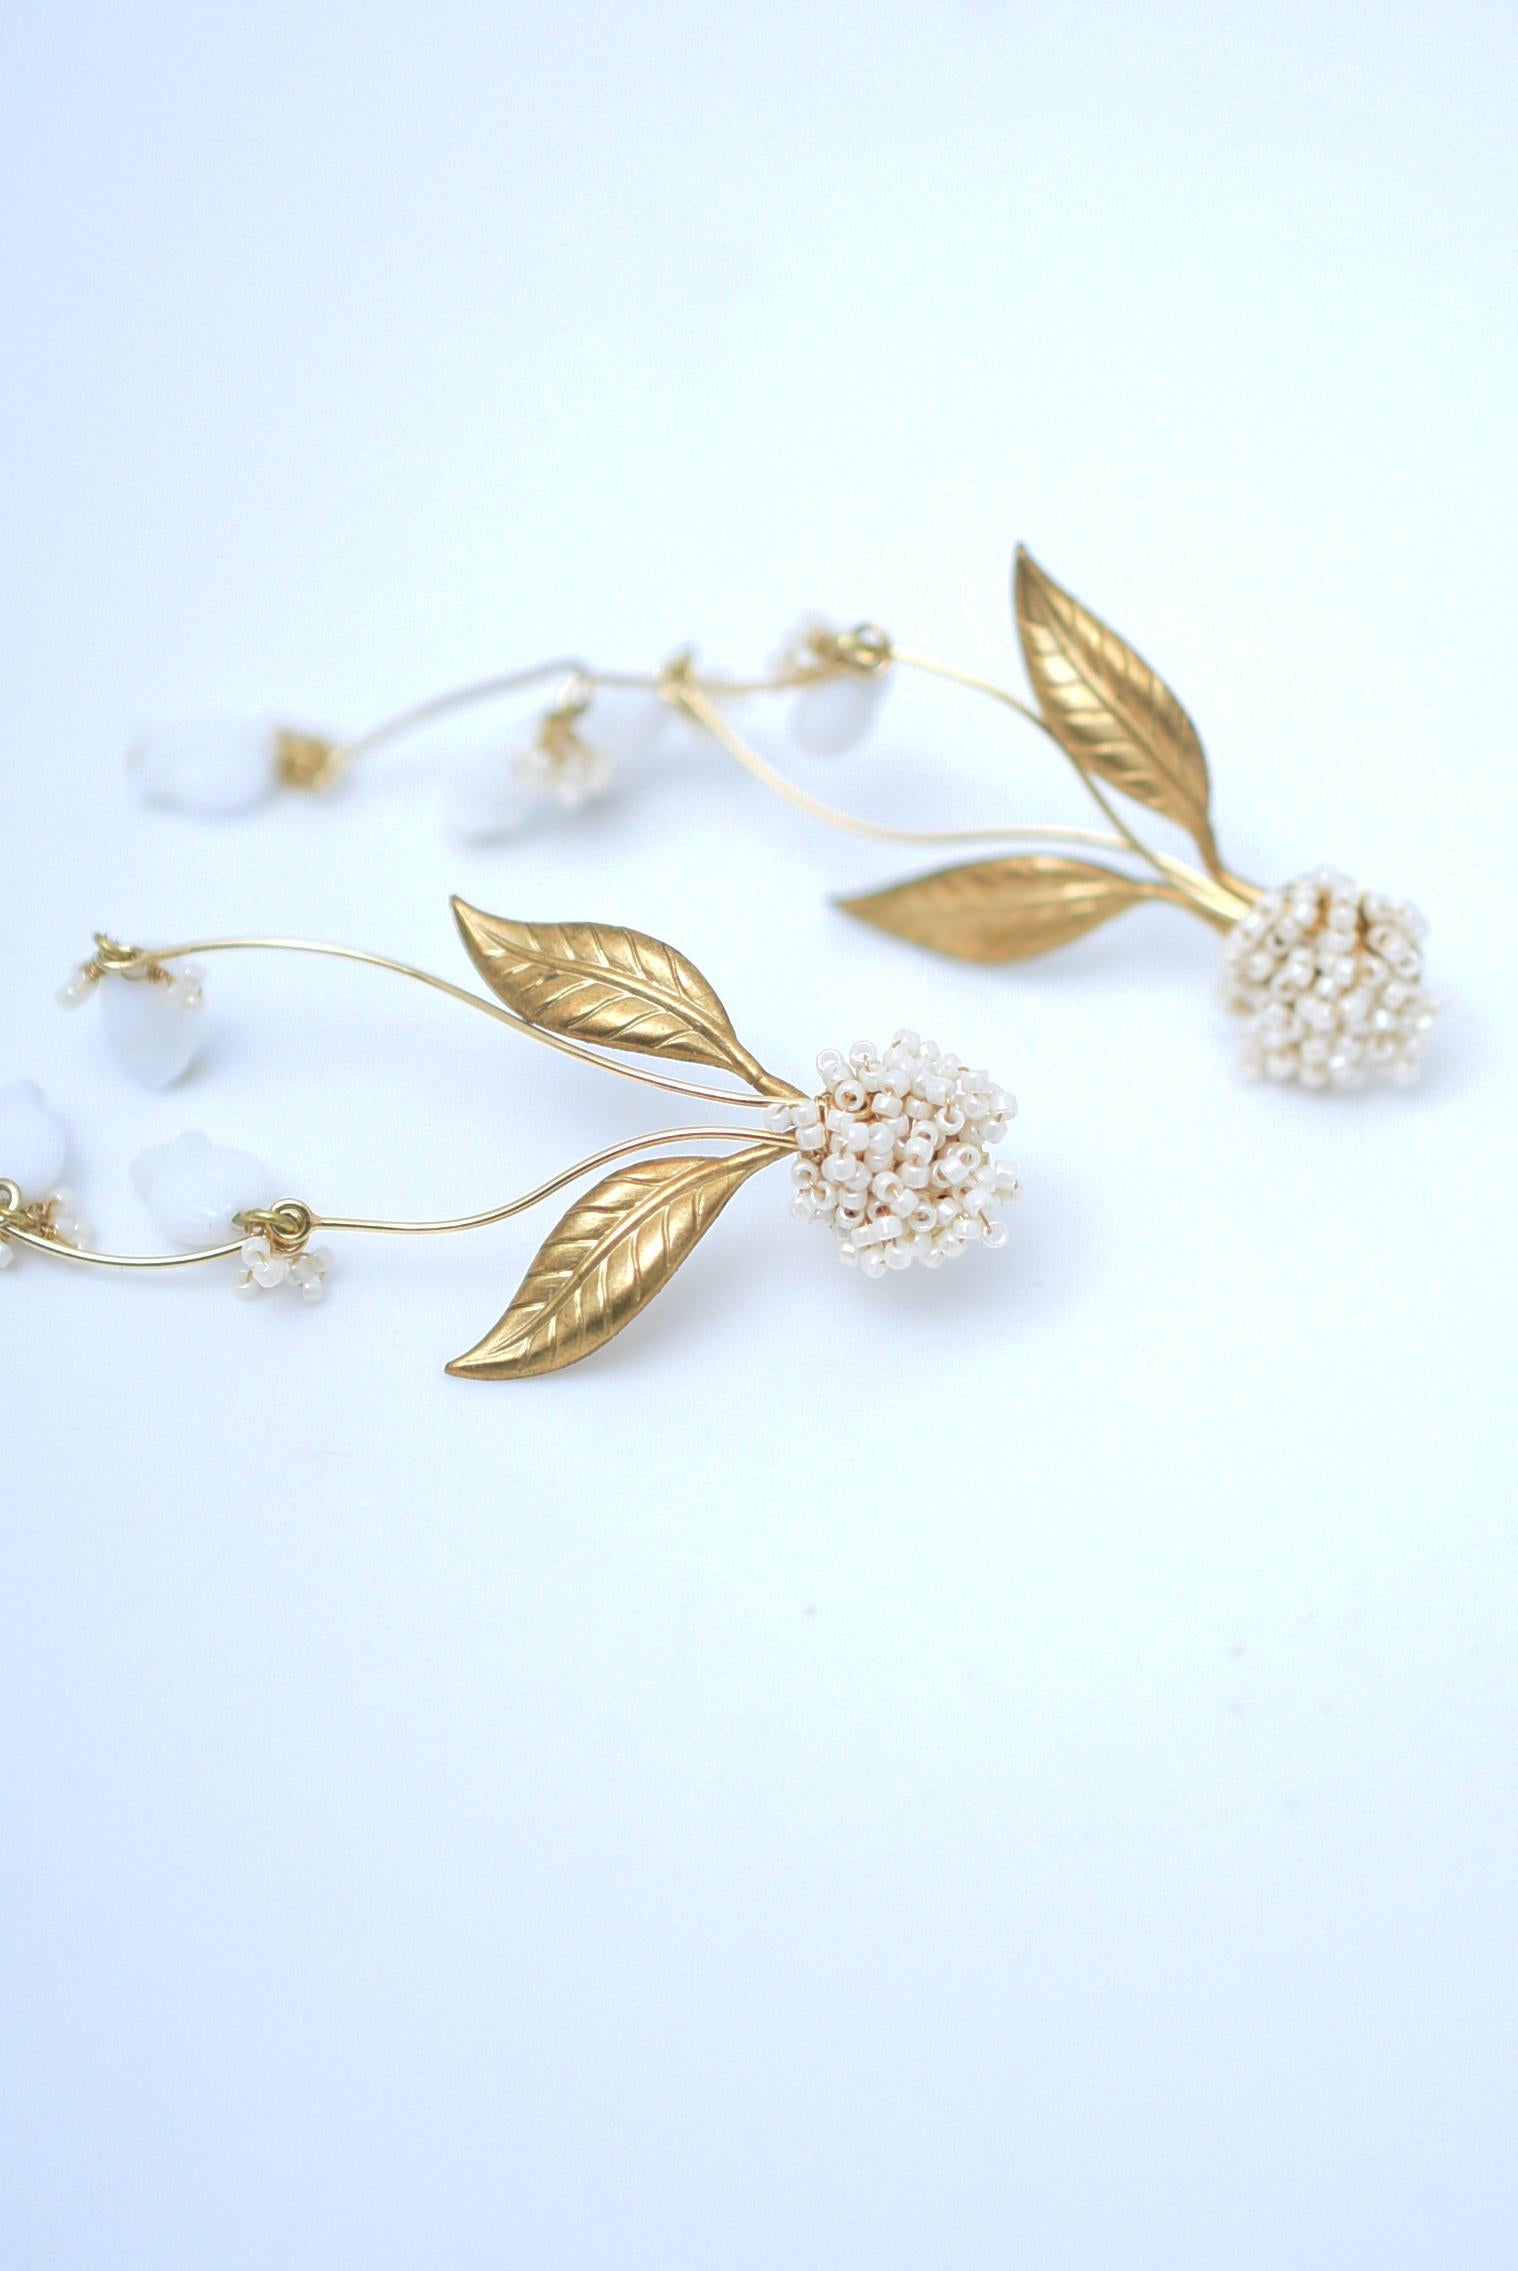 material:brass,1940's Garmany vintage glass parts,,glass beads,stainless
size:length 9cm

The beige colour of the beads emphasises the whiteness of the lily and makes it look more neat and clean.
The small, swaying lily is very pretty and perfect